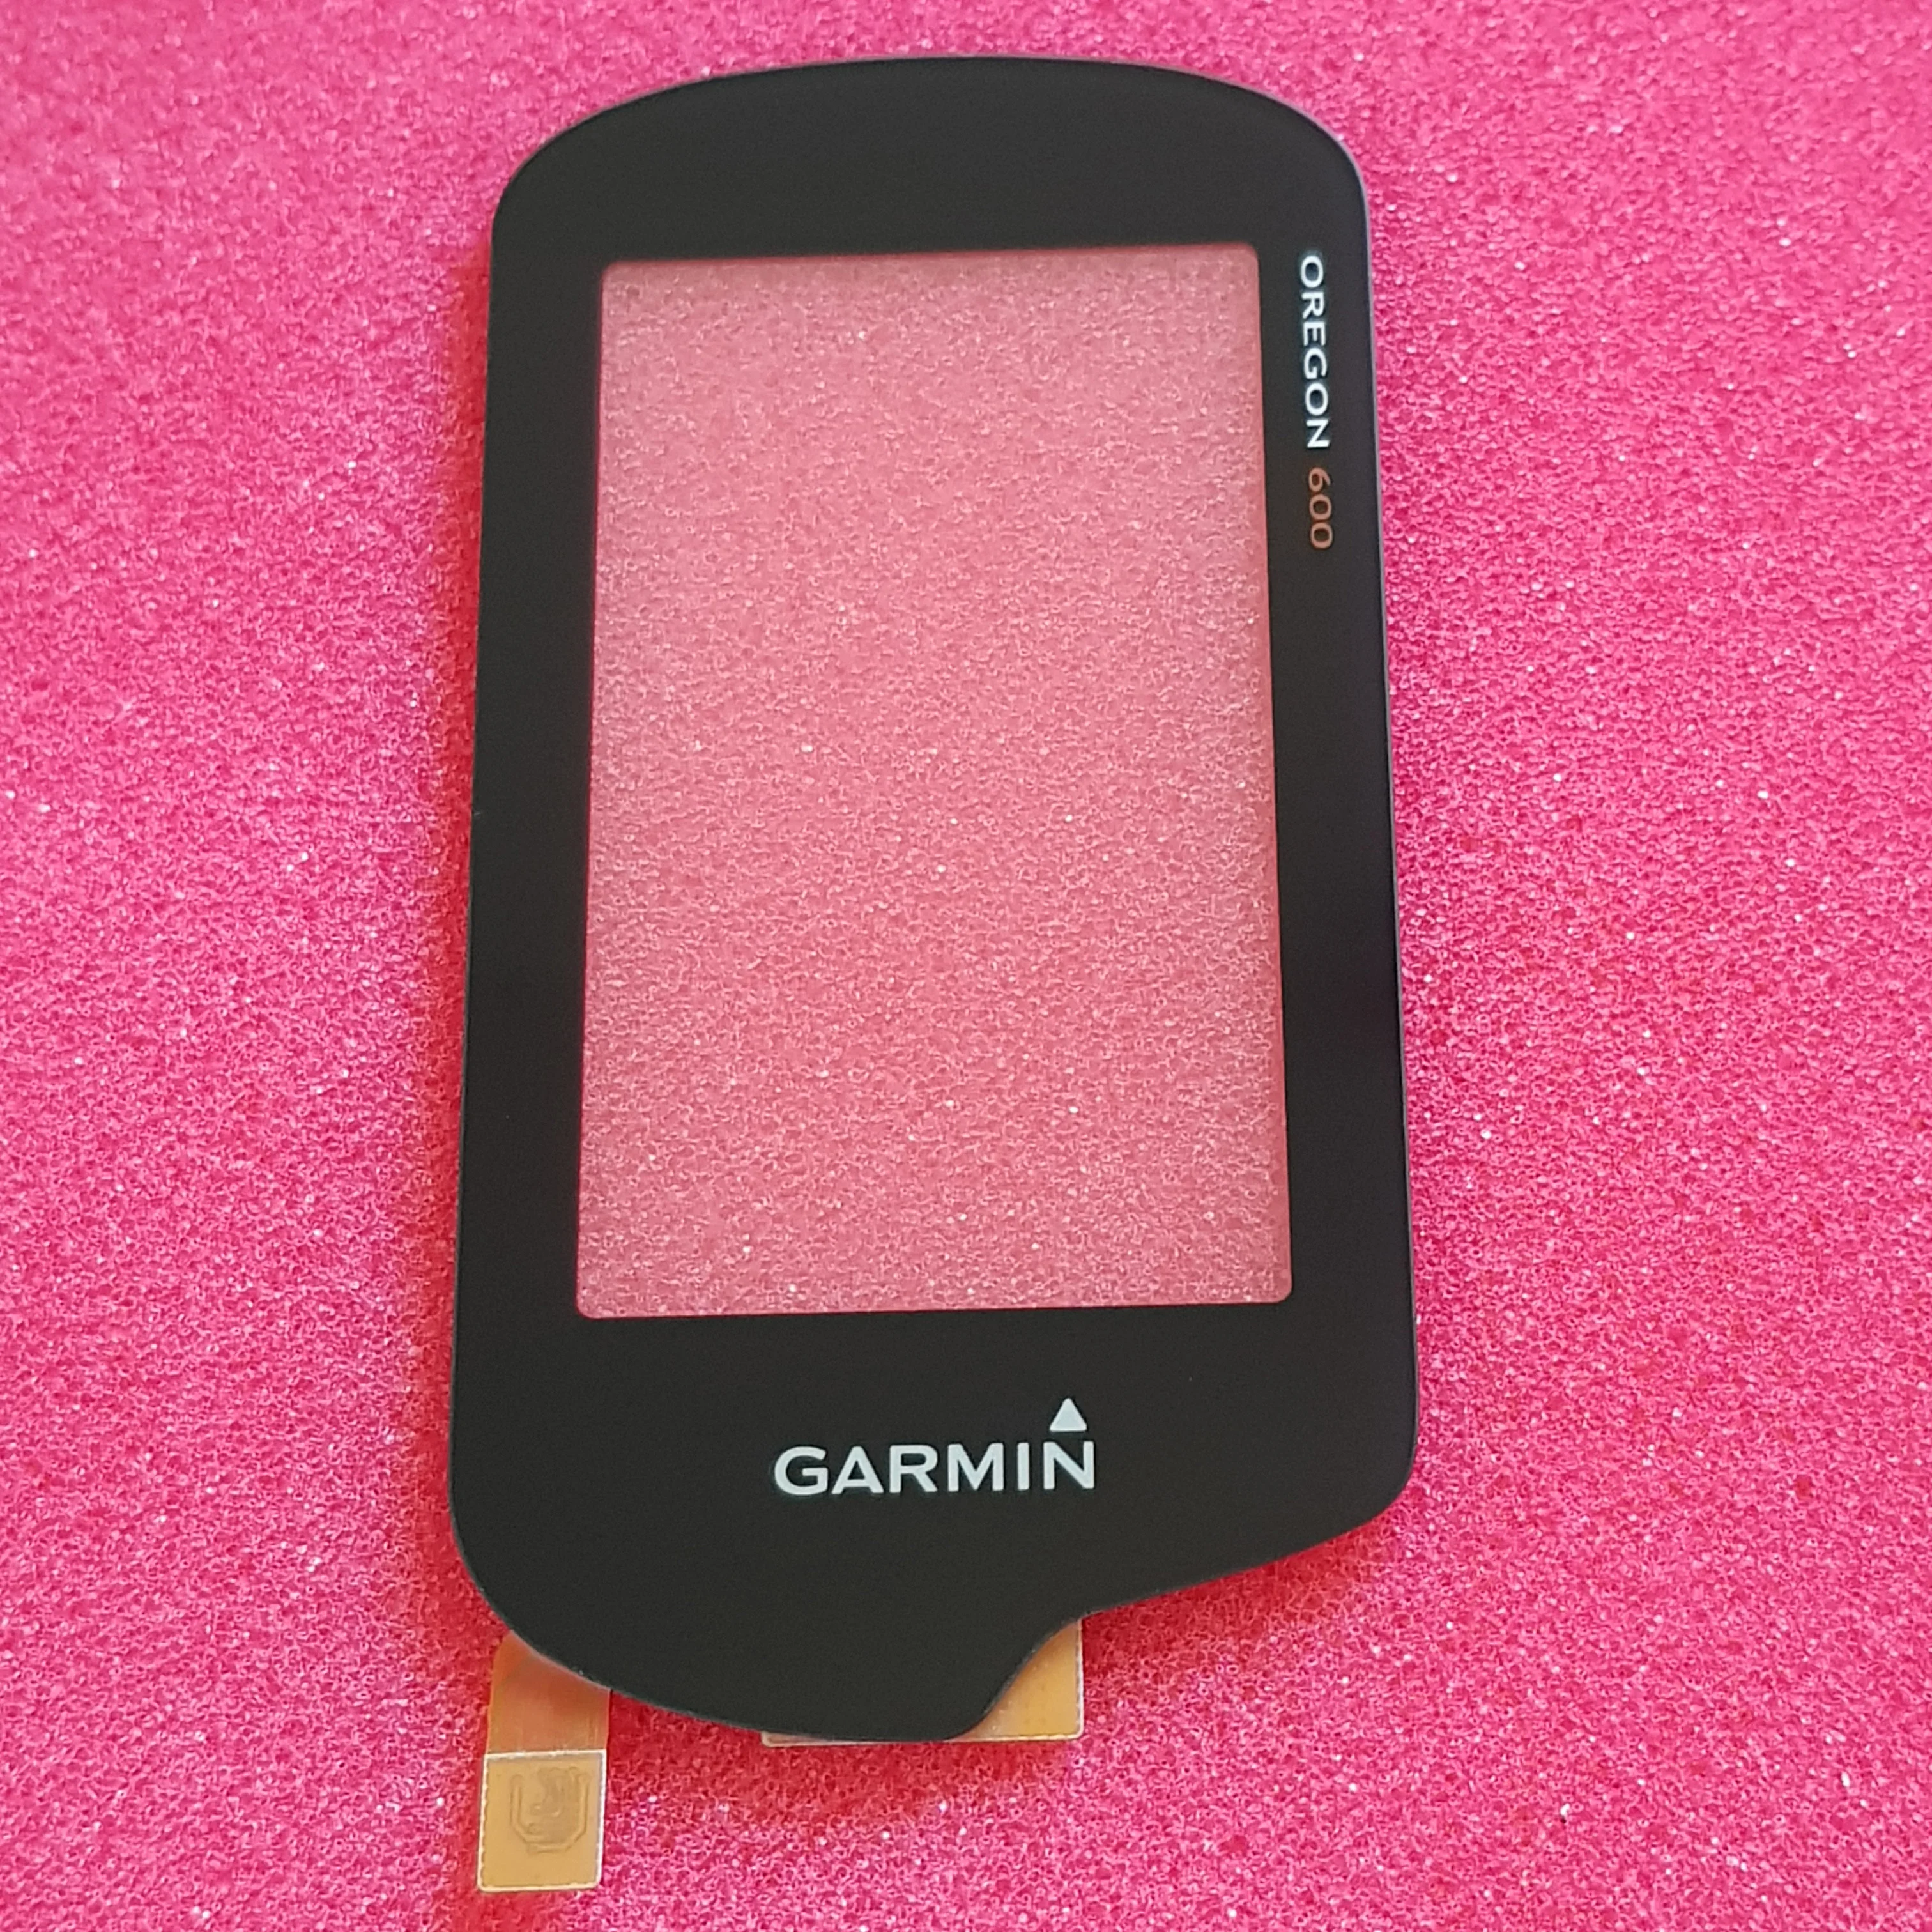 Original used Glass cover for GARMIN oregon 600 with Touch screen digitizer for oregon 600 lcd garmin Repair replacement - AliExpress Cellphones &